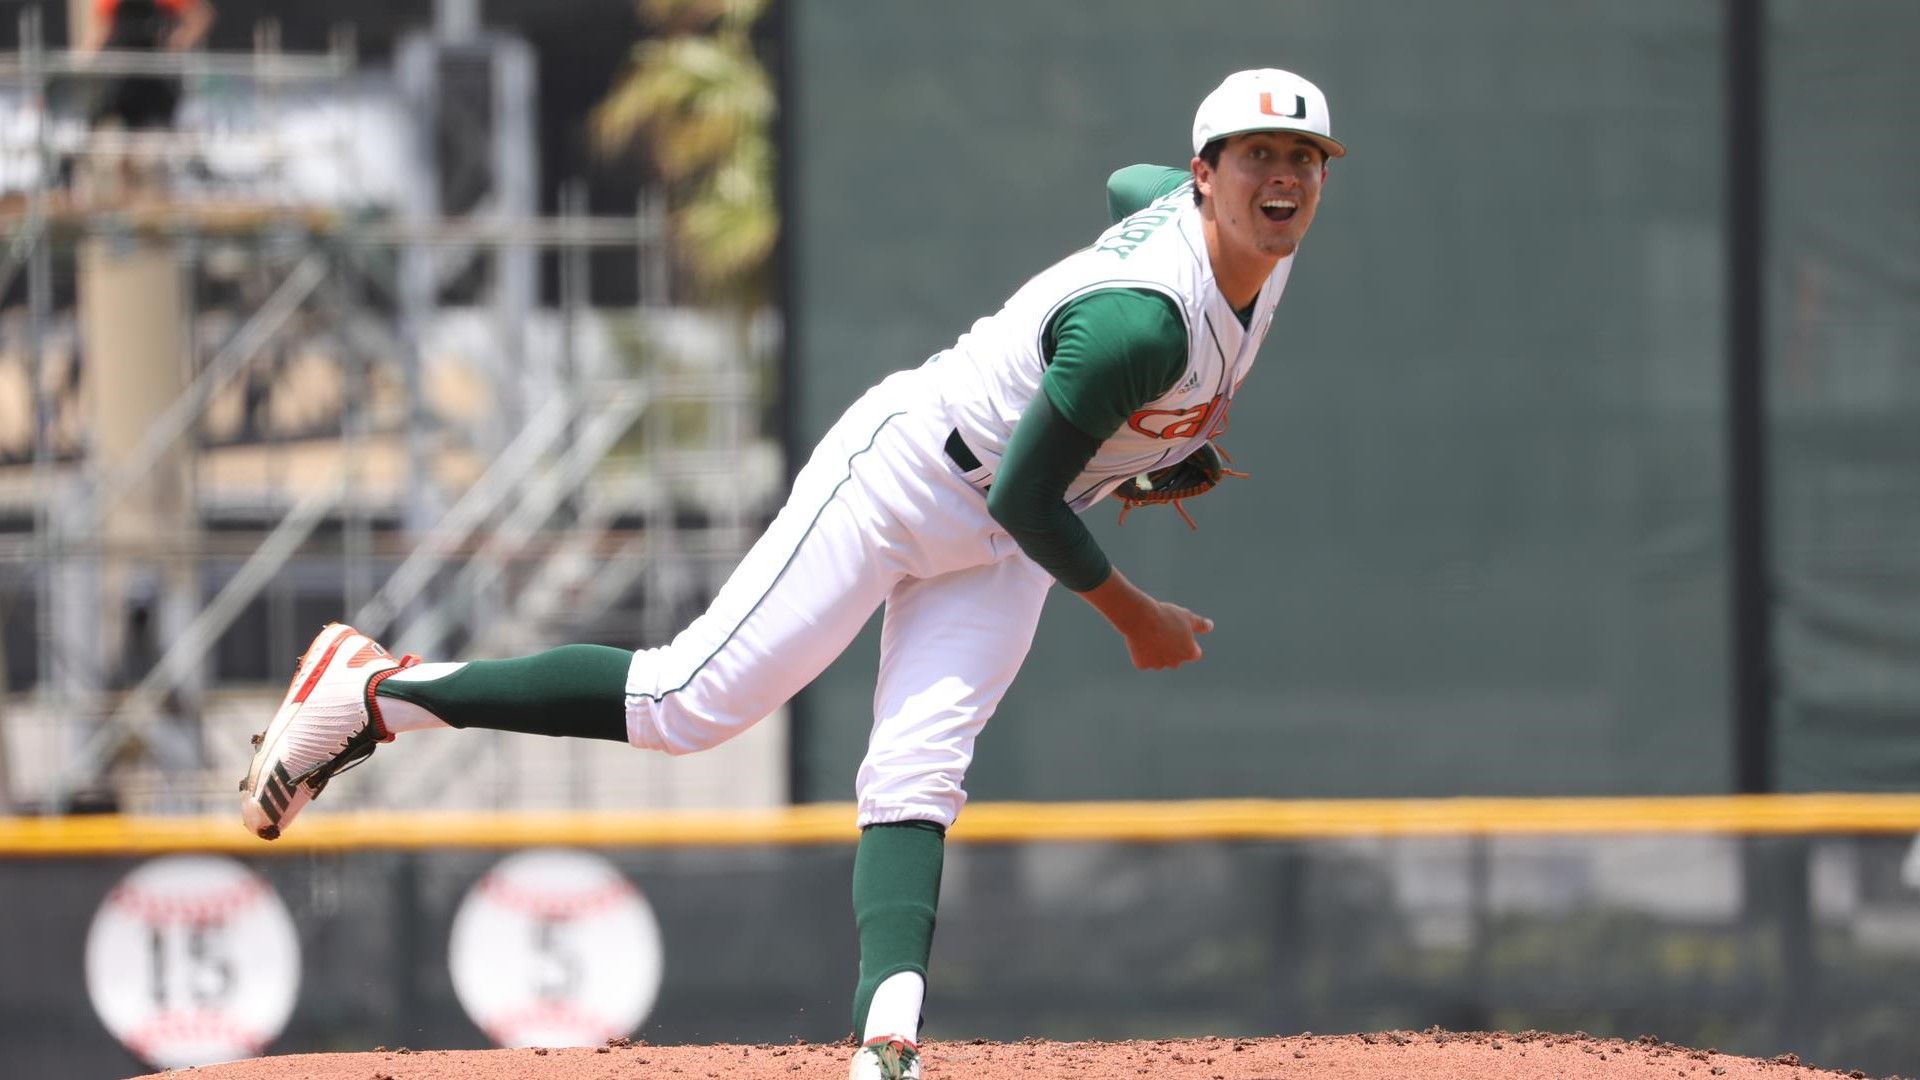 Canes Fall To Pittsburgh, 3-0